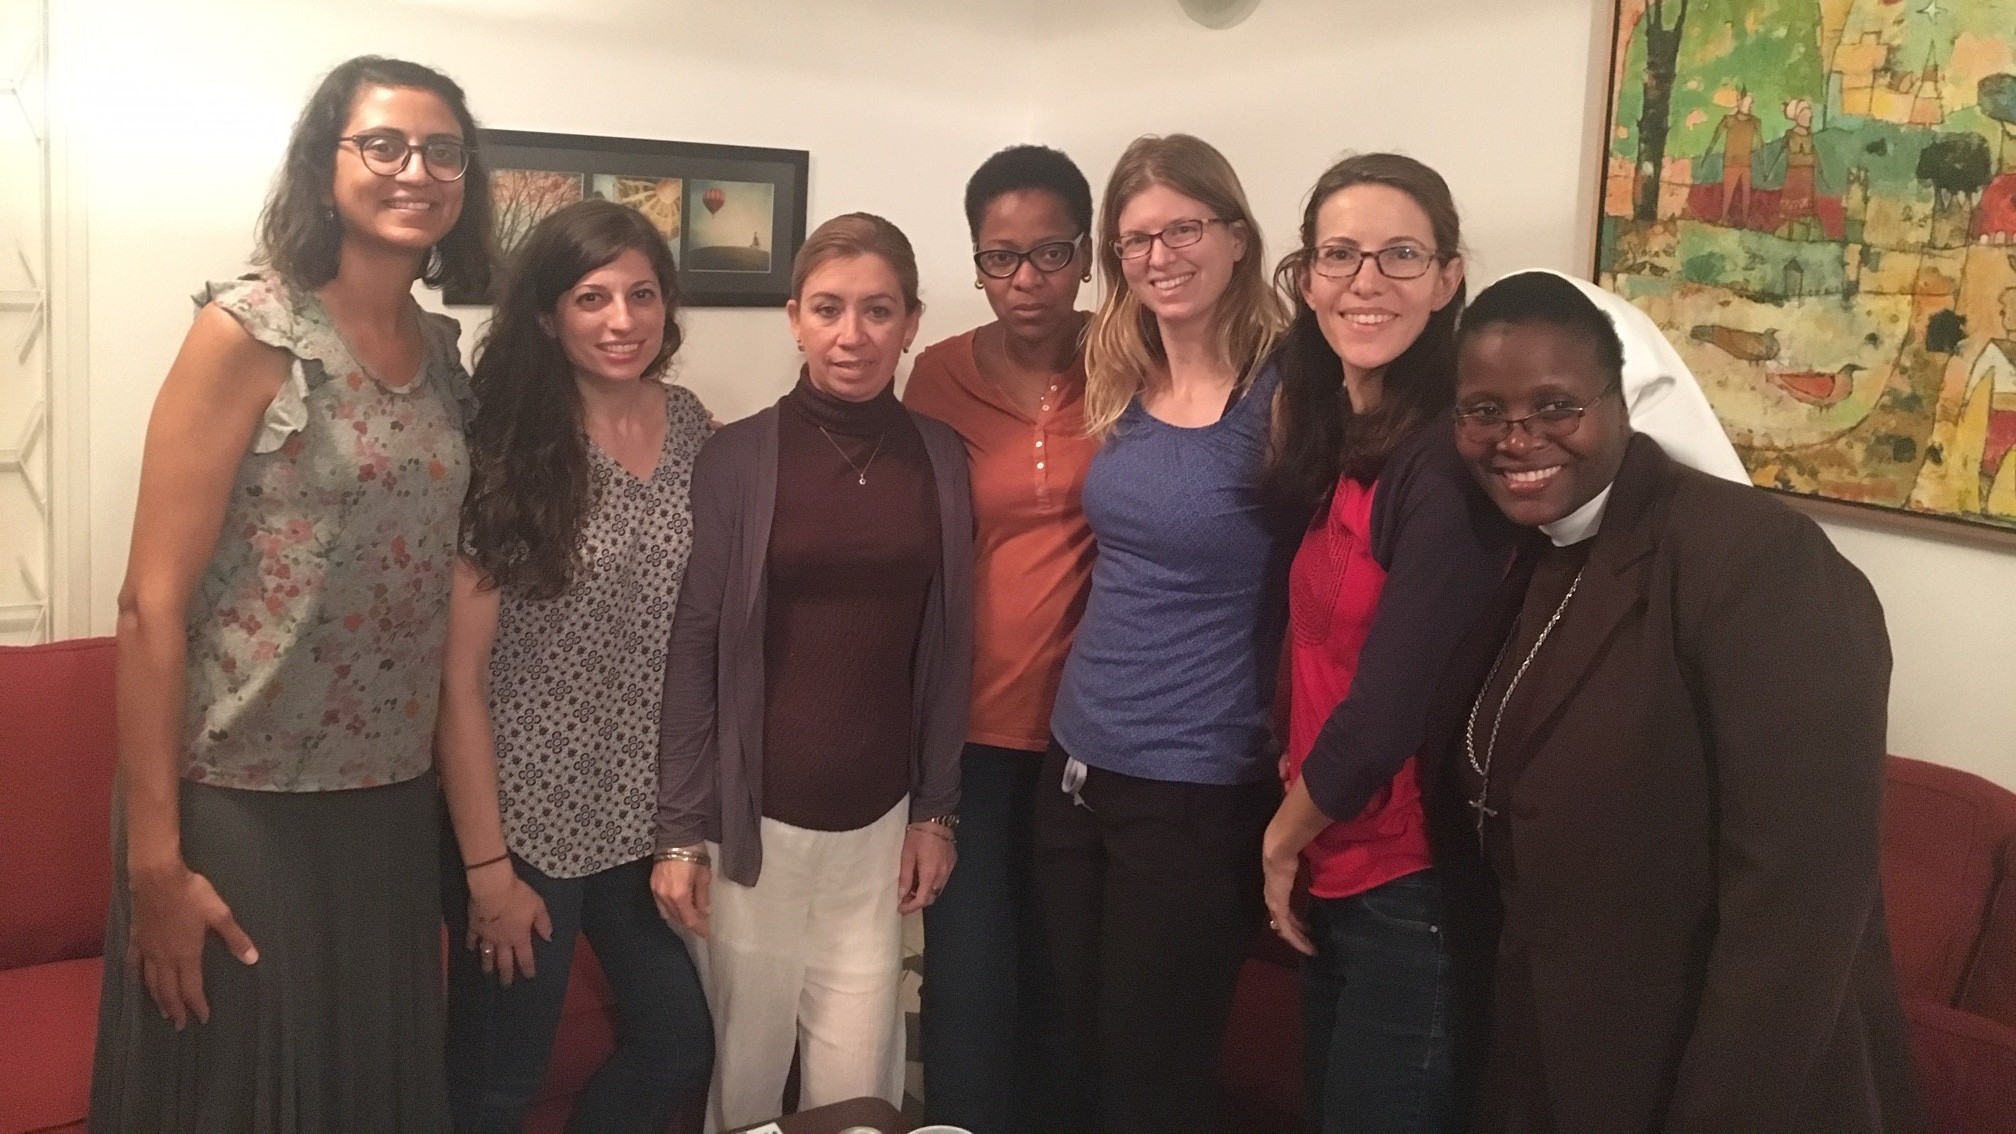 Emory infectious disease journal club in Mozambique